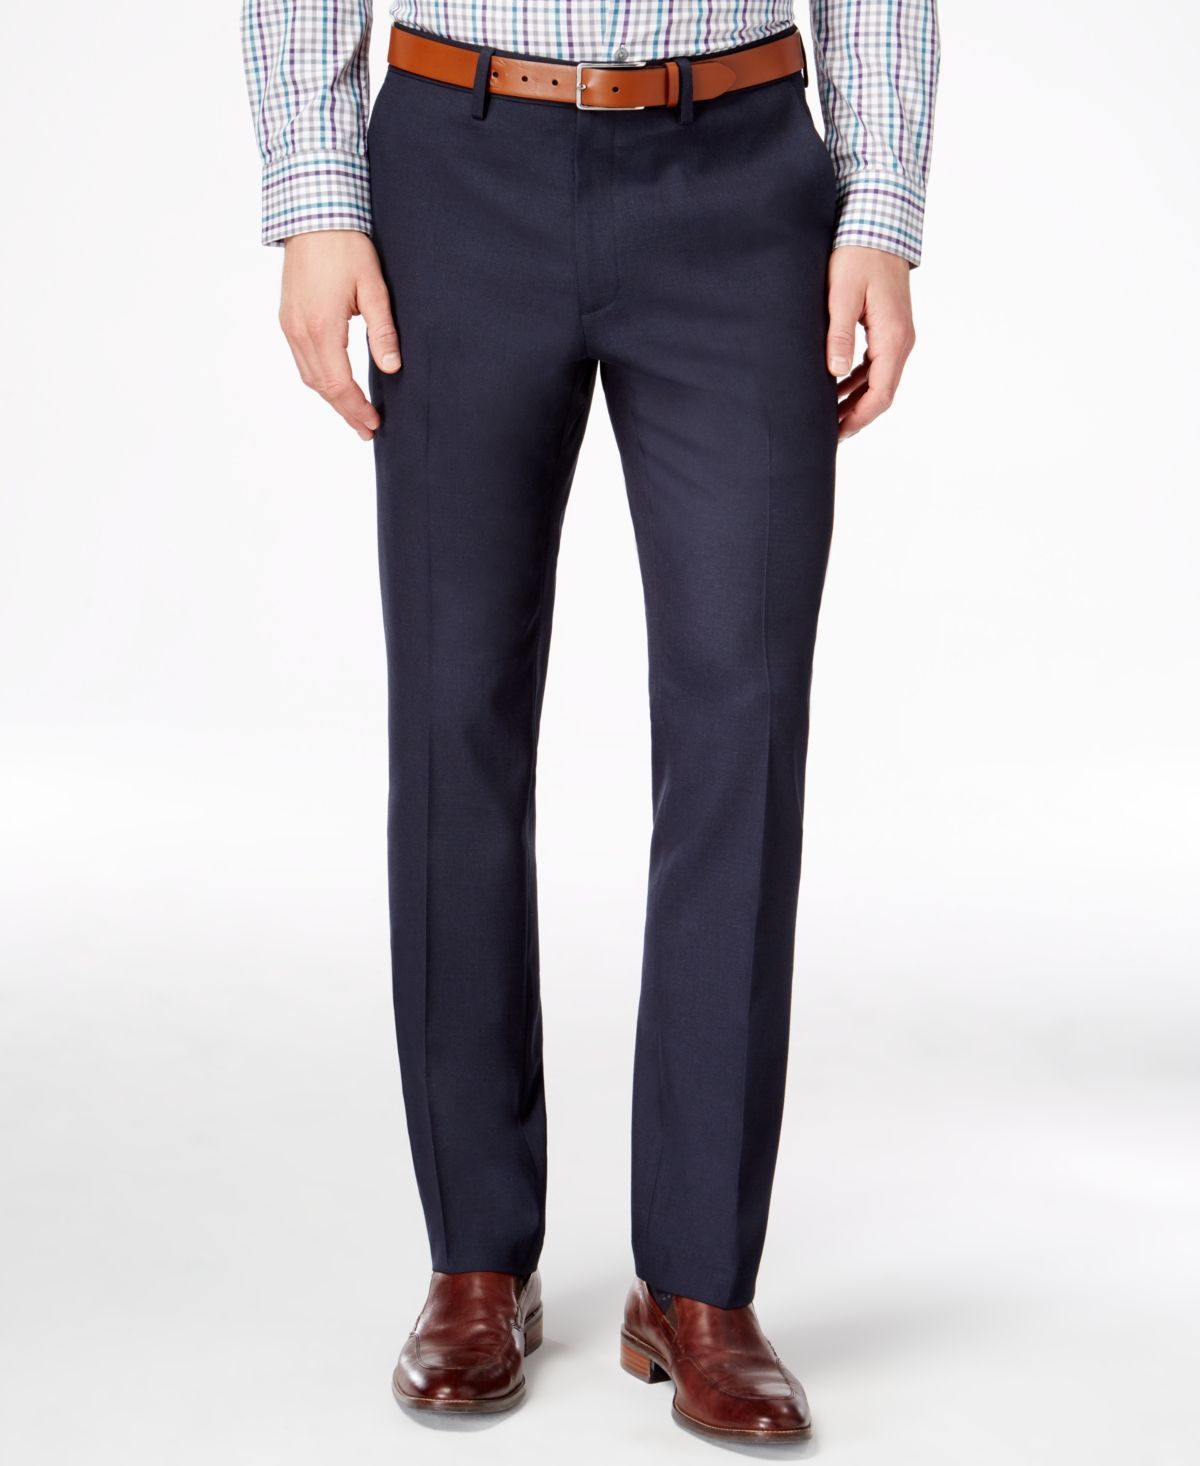 Kenneth Cole Reaction Men's Slim-Fit Stretch Dress Pants, Created for Macy's & Reviews - Pants - Men - Macy's - Kenneth Cole Reaction Men's Slim-Fit Stretch Dress Pants, Created for Macy's & Reviews - Pants - Men - Macy's -   16 fitness Men outfit ideas